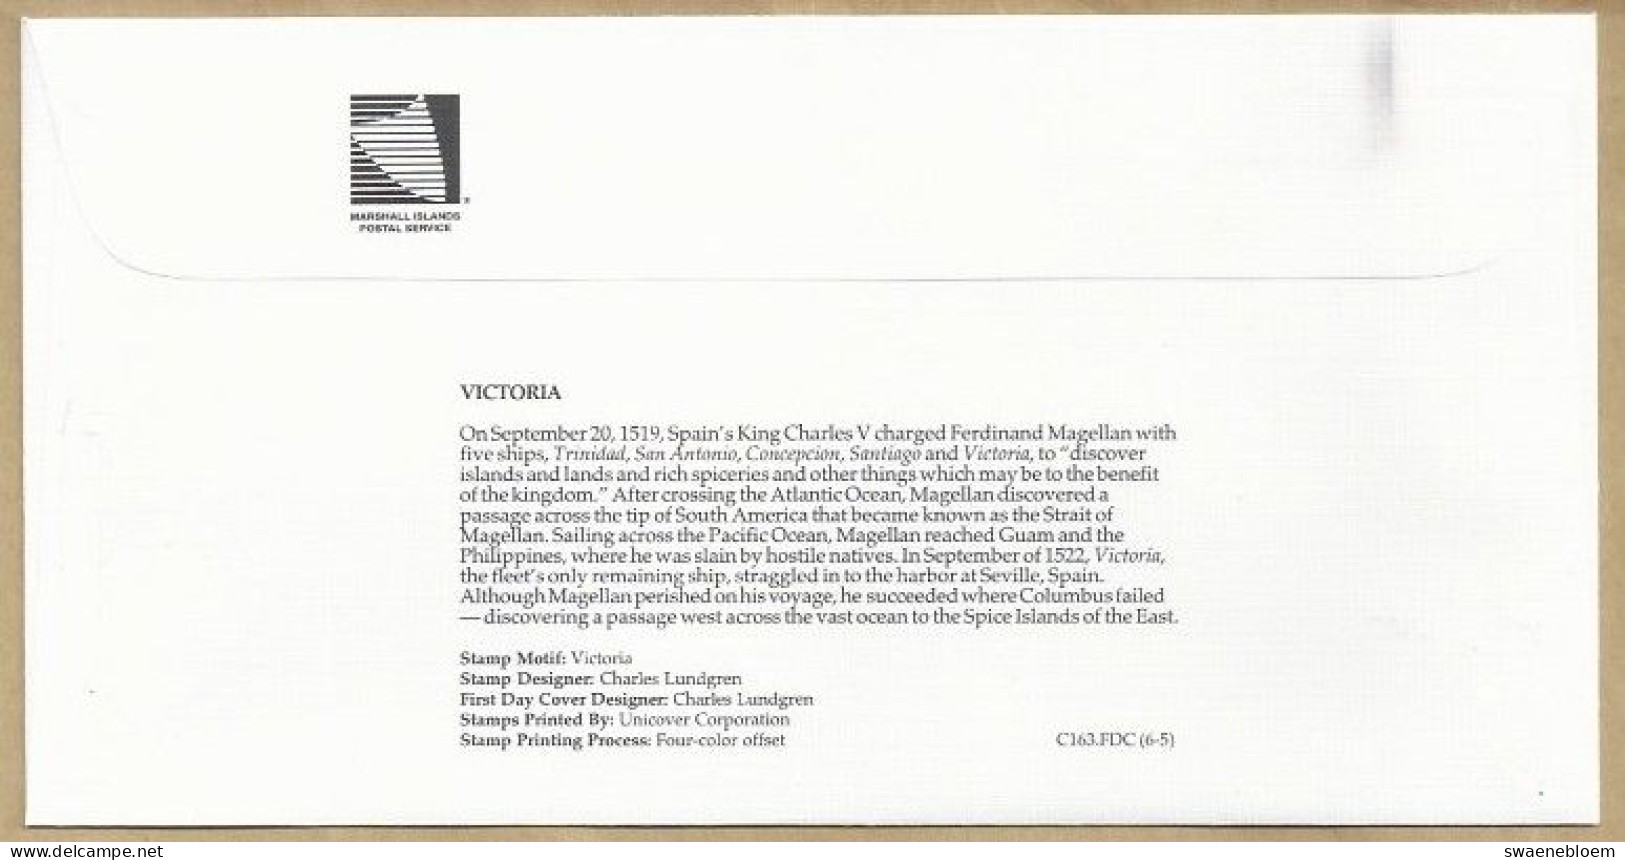 FDC. REPUBLIC OF THE MARSHALL ISLANDS. JUL 20 2000 MAJURO. VICTORIA. SHIPS OF DISCOVERY. C163.FDC. (6-5) - Marshall